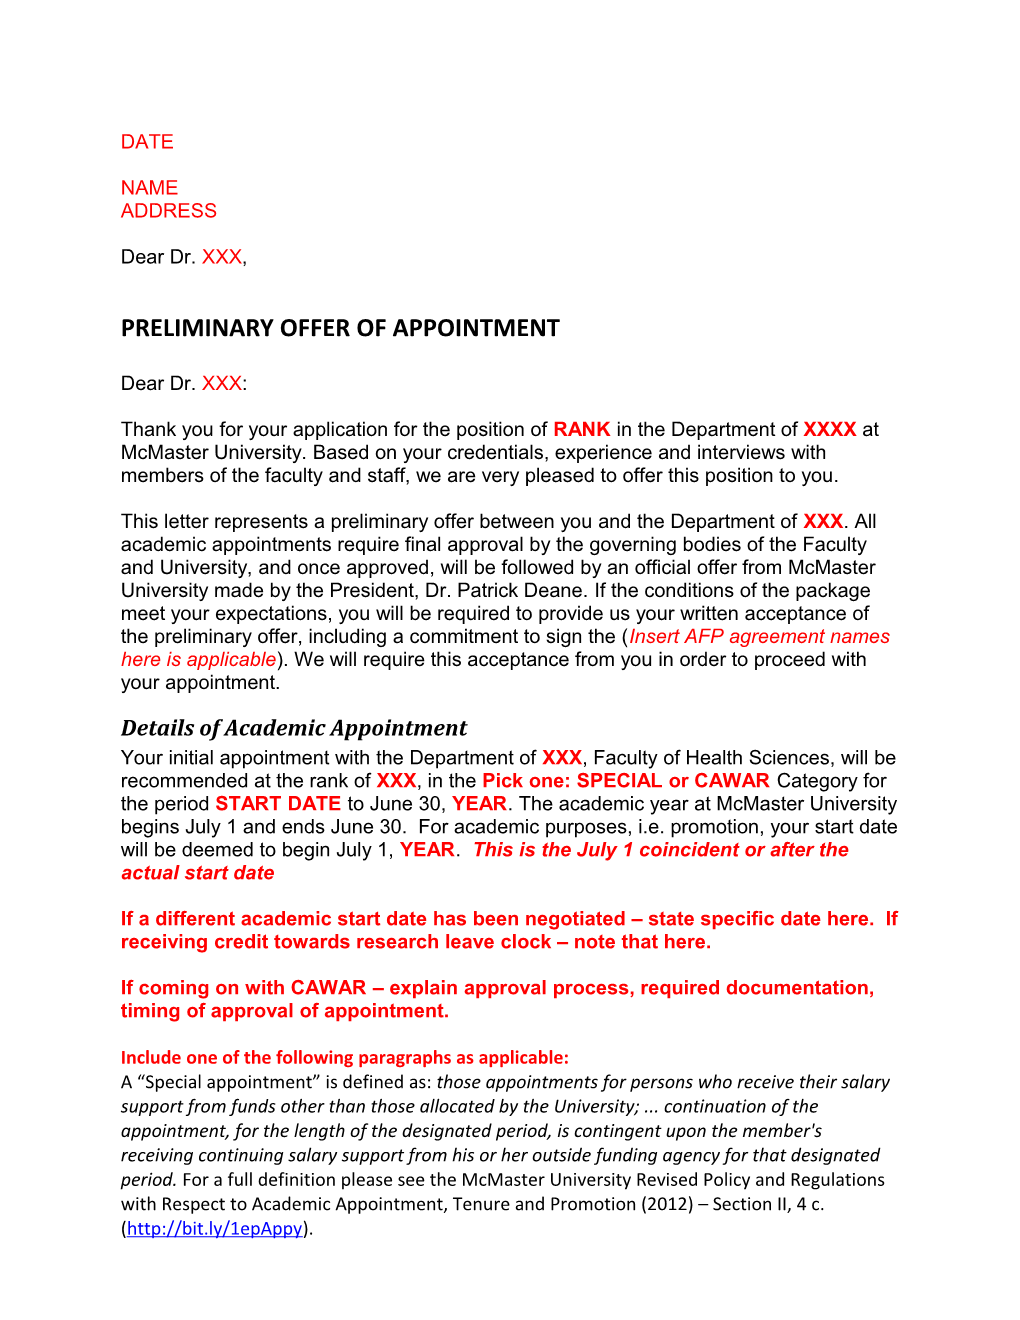 Preliminary Offer of Appointment s1